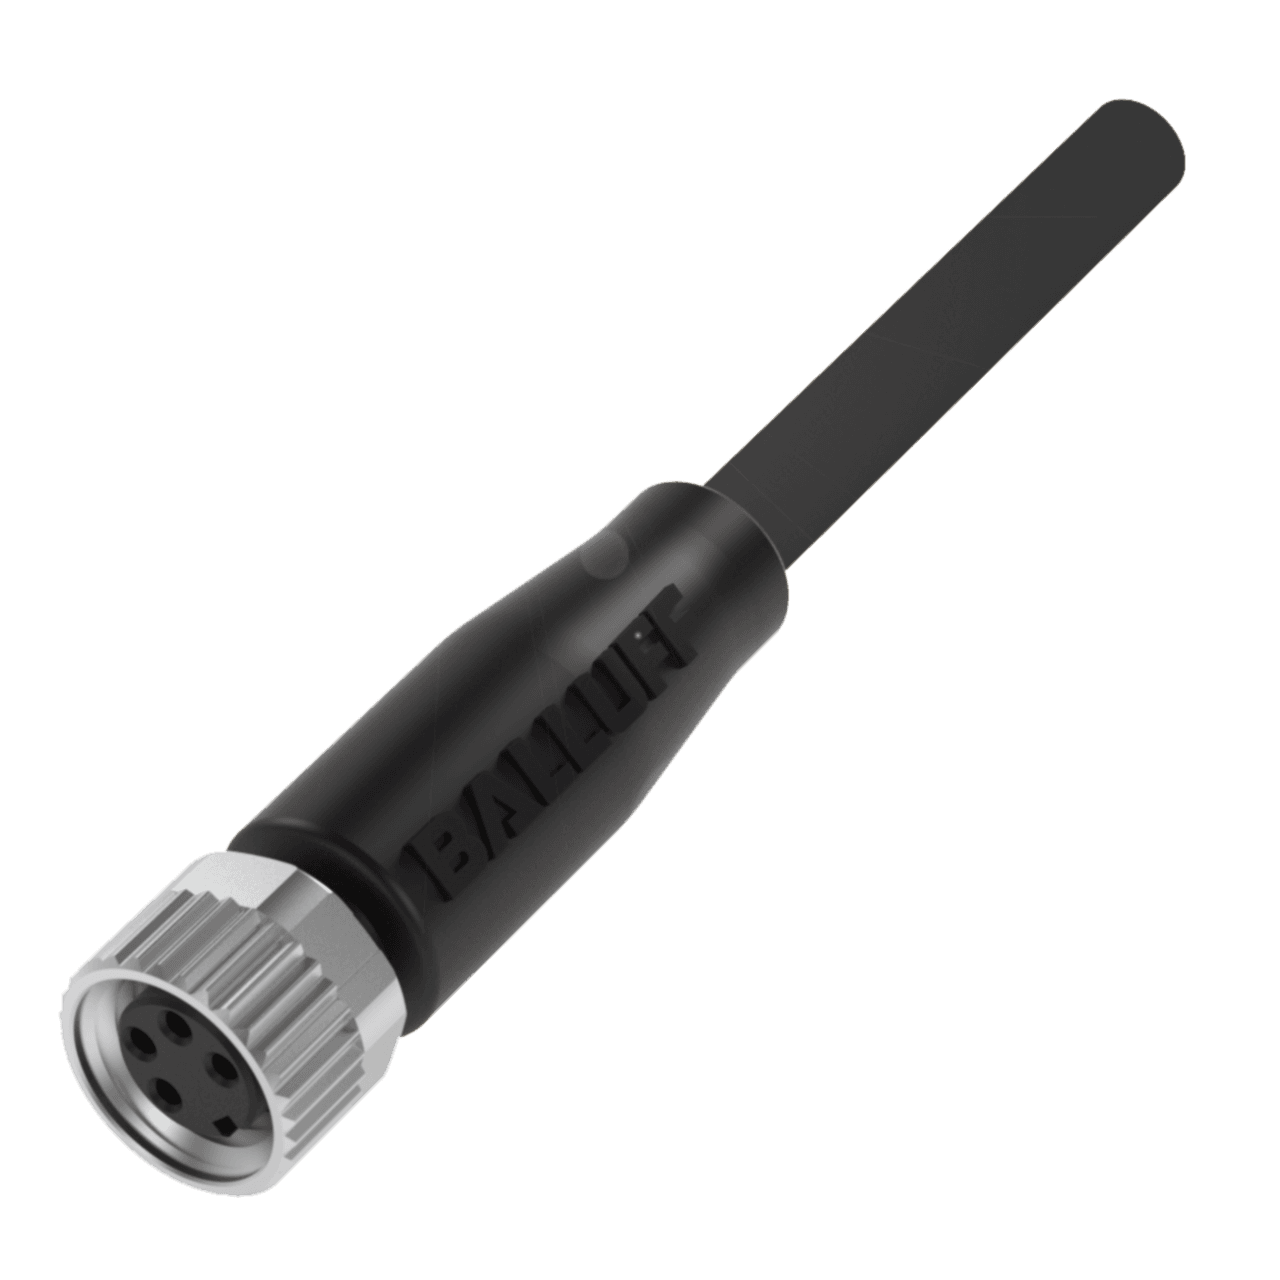 Balluff BCC02N3 Connection: M8x1-Female, Straight, 4-pin, A-coded, Cable: PUR black, 5.00 m, Drag chain compatible, Number of conductors: 4, Conductor cross-section: 0.34 mm², Cable temperature, fixed routing: -50...90 °C, Cable temperature, flexible routing: -25...90 °C